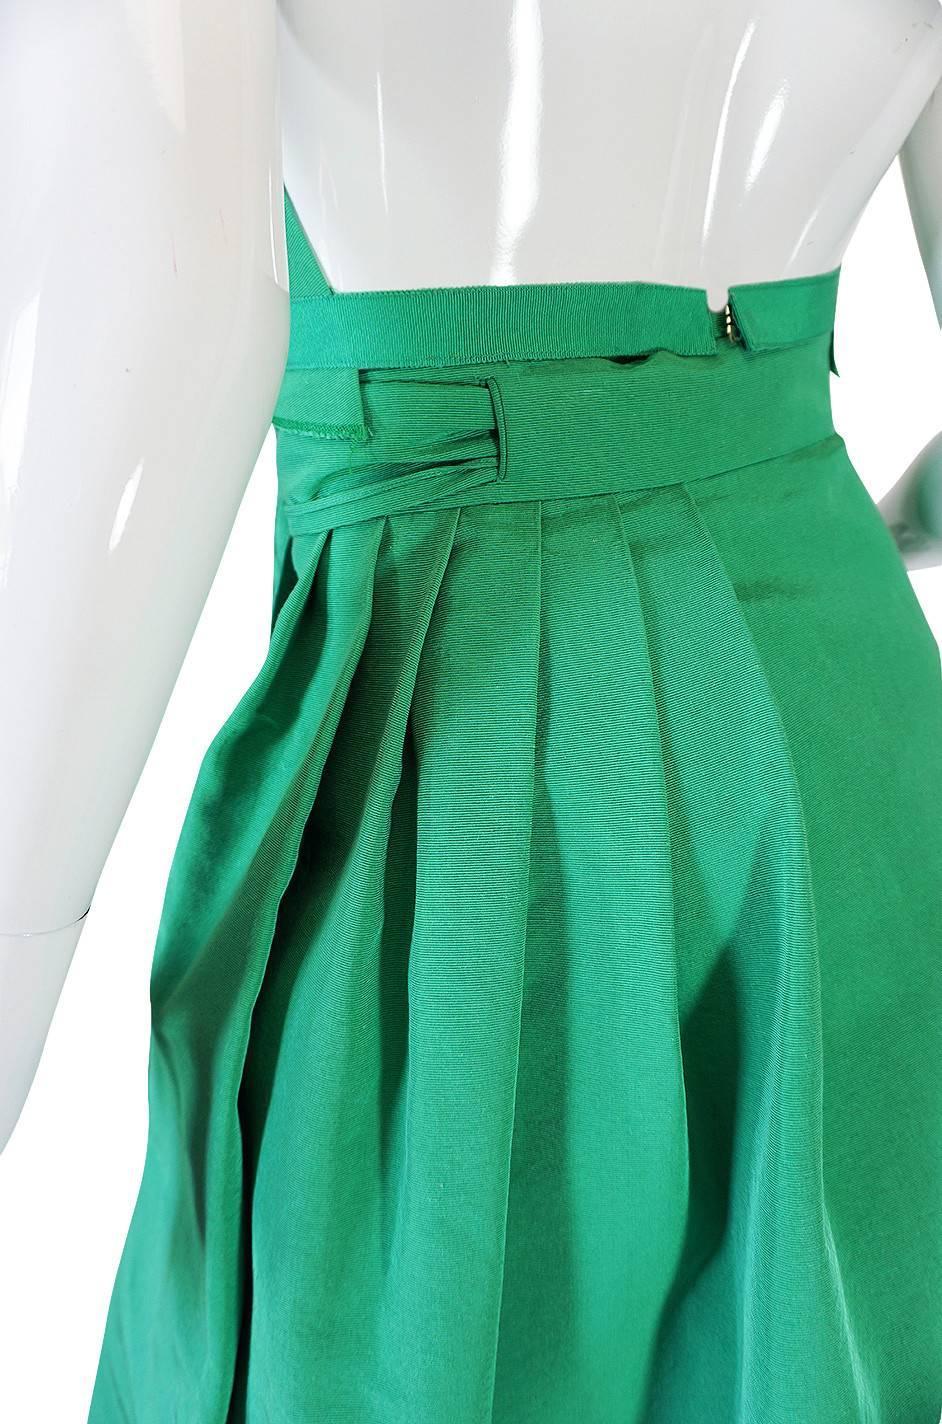 Backless 1960s Green Pauline Trigere Halter Top and Skirt Dress Set For ...